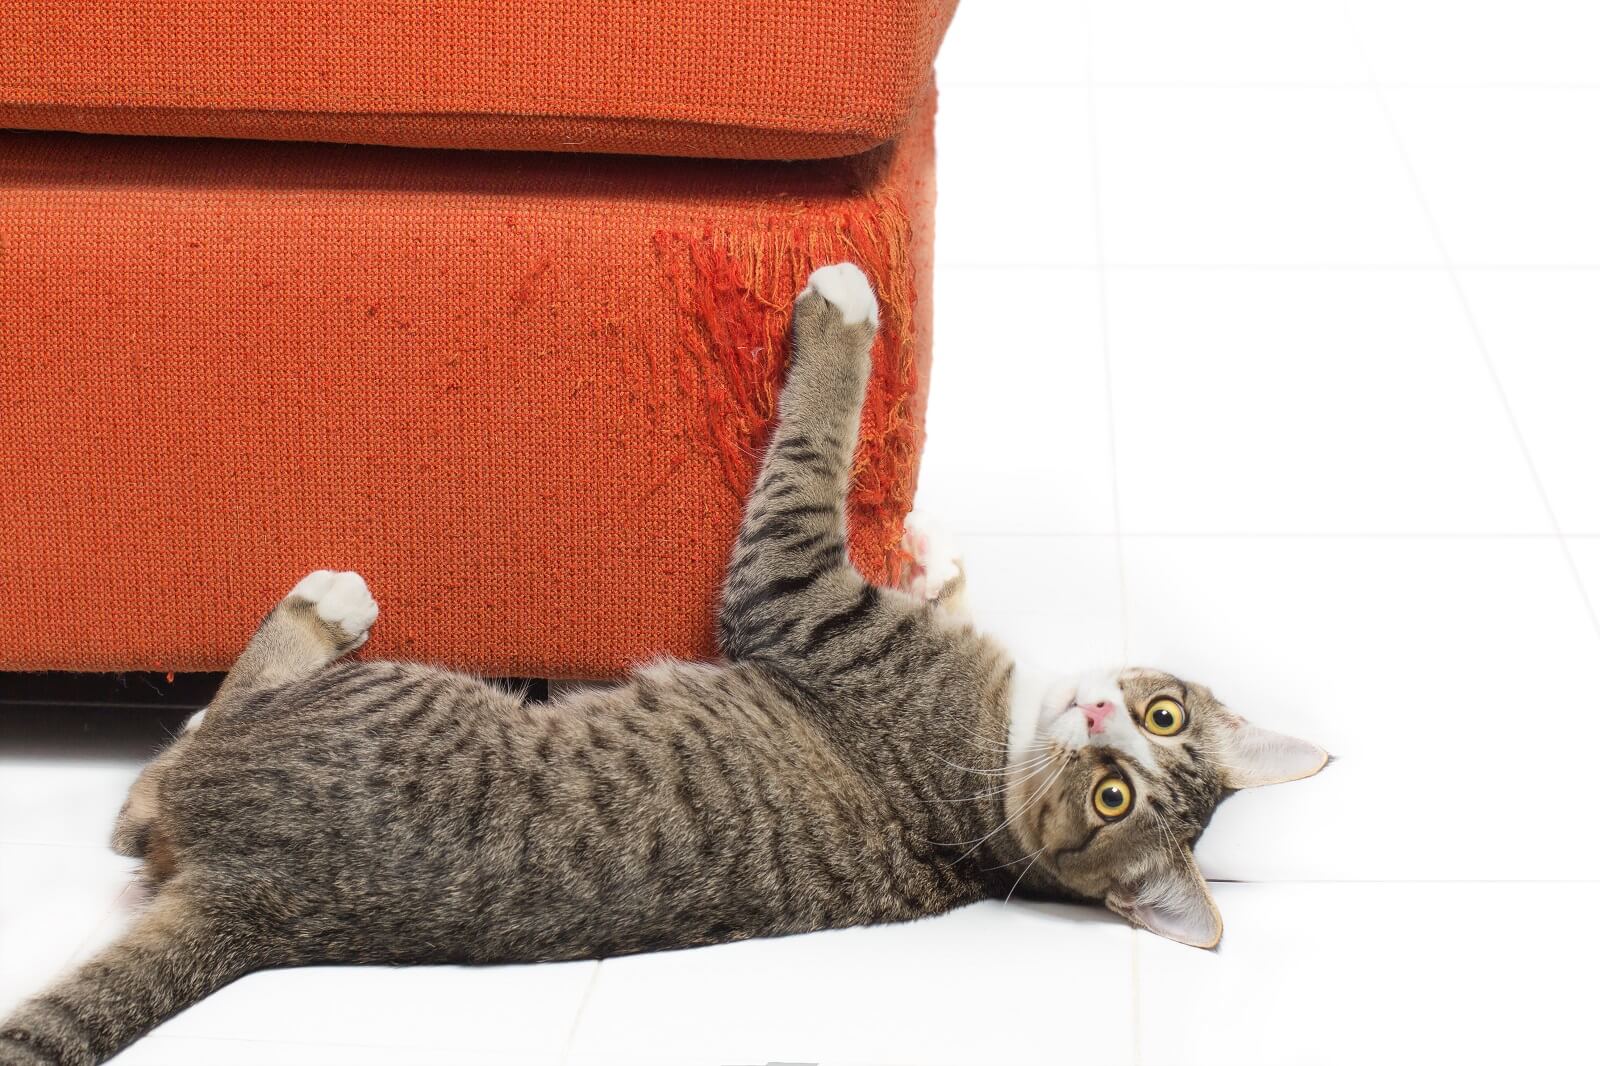 Why Does My Cat Scratch The Floor? - The Fit Pets